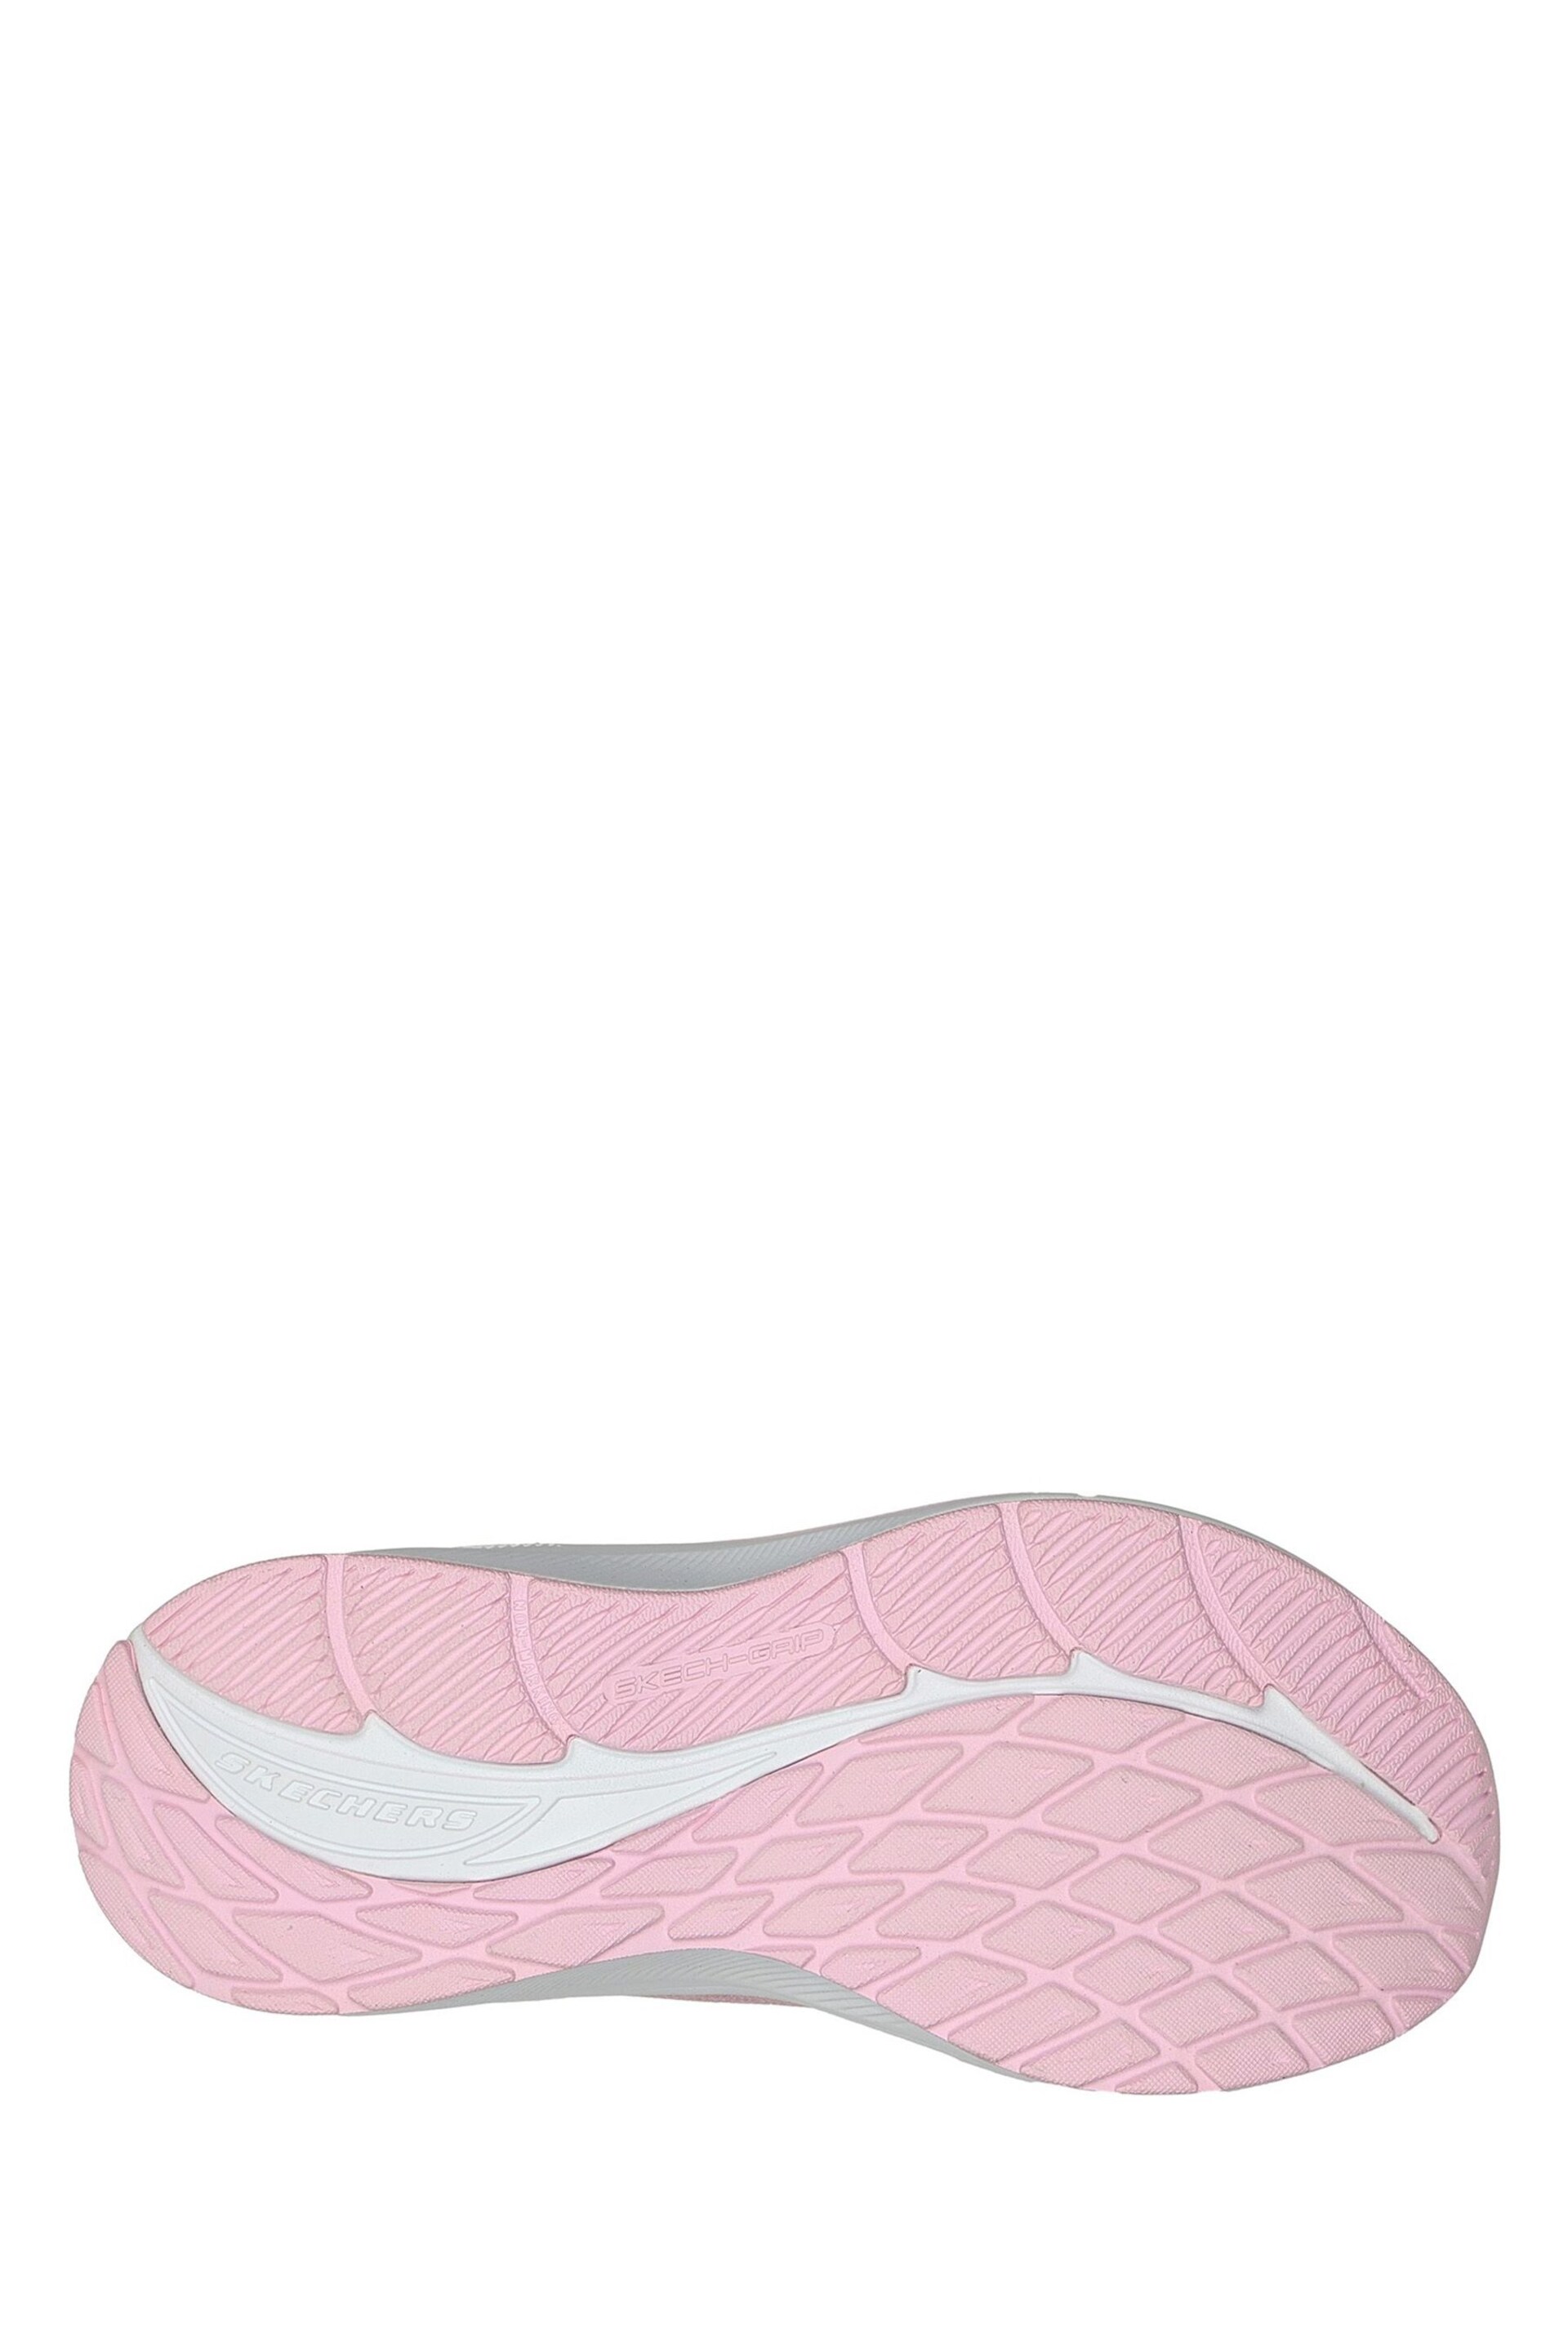 Skechers Pink Elite Sport Radiant Squad Trainers - Image 3 of 5